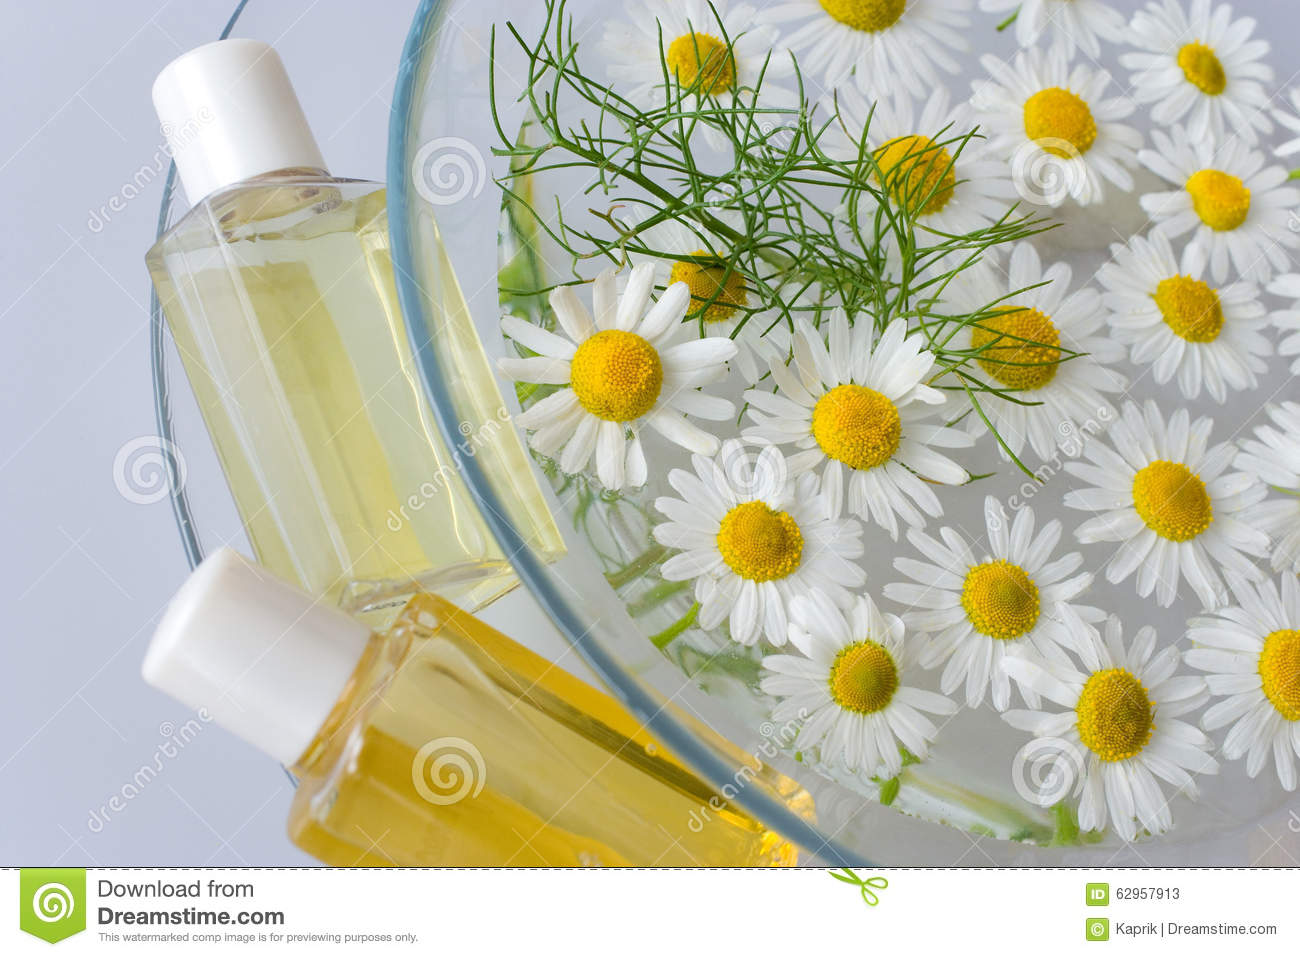 Aromatherapy   Herbal Healing Lotion   Camomile Flowers In The Water